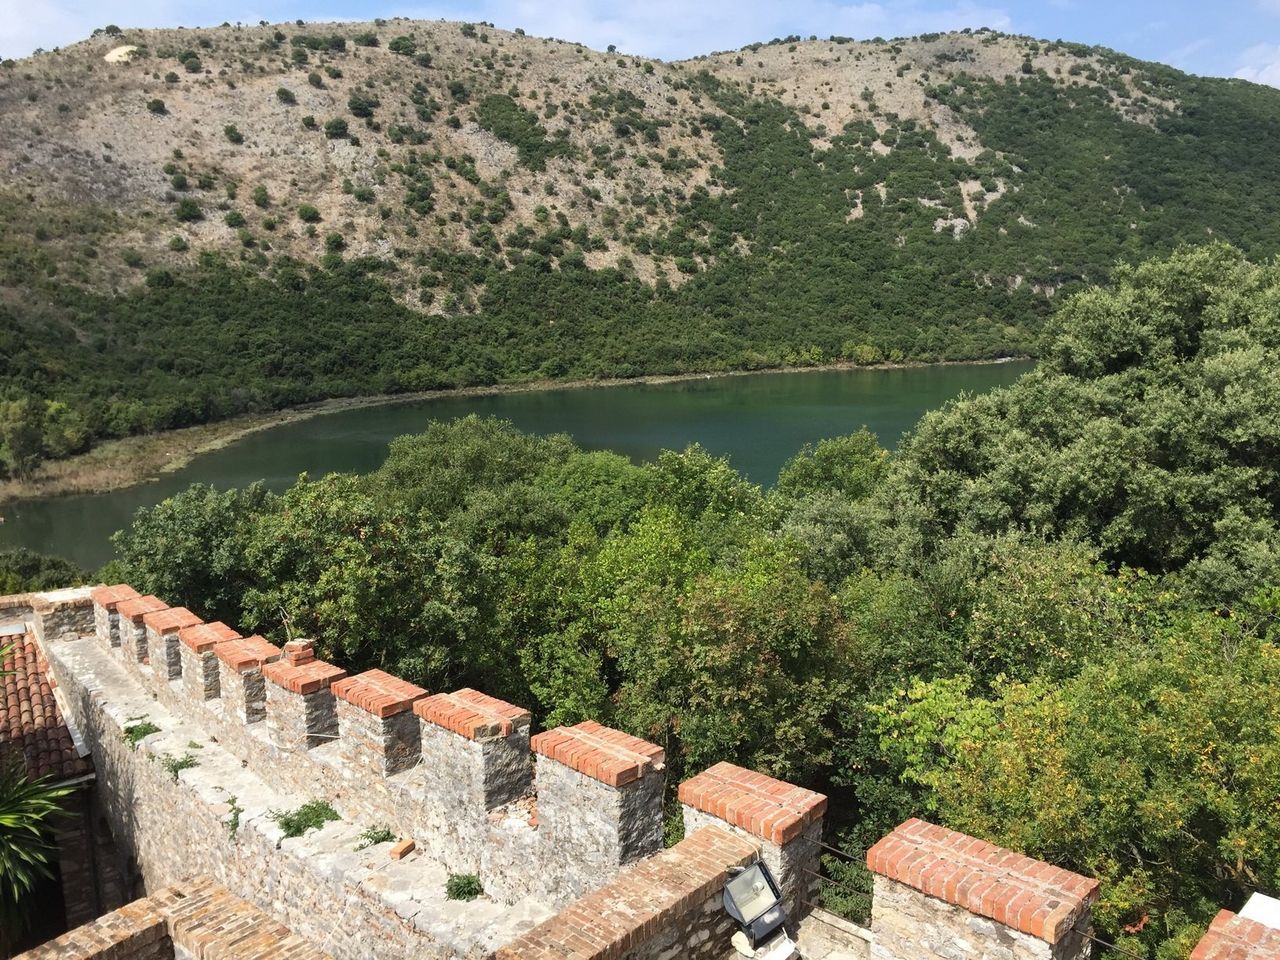 Visiting the Butrint National Park